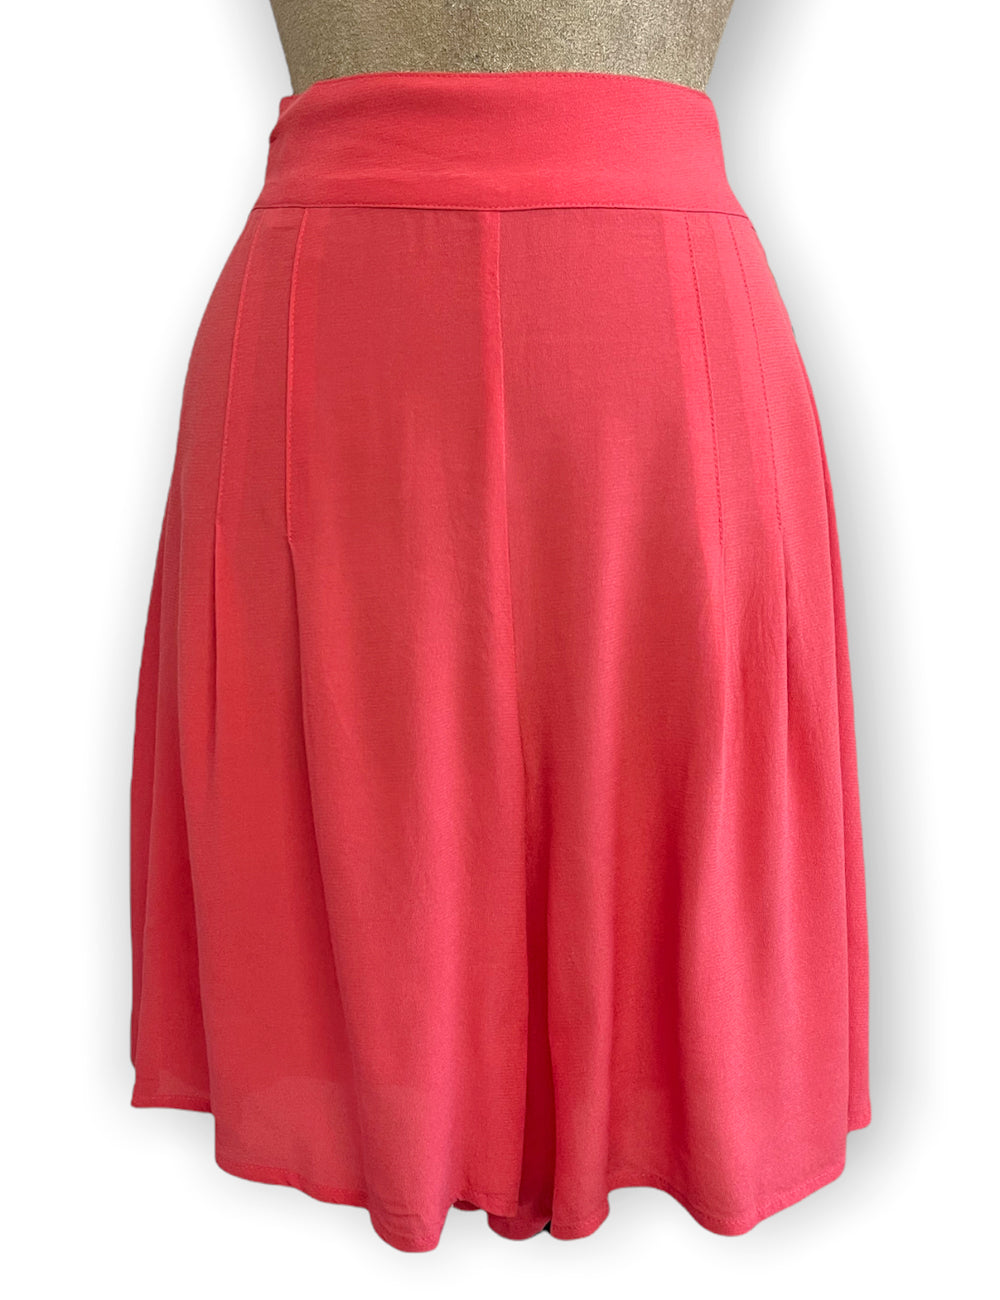 FINAL SALE - Solid Coral Pink High Waist Retro Shorts